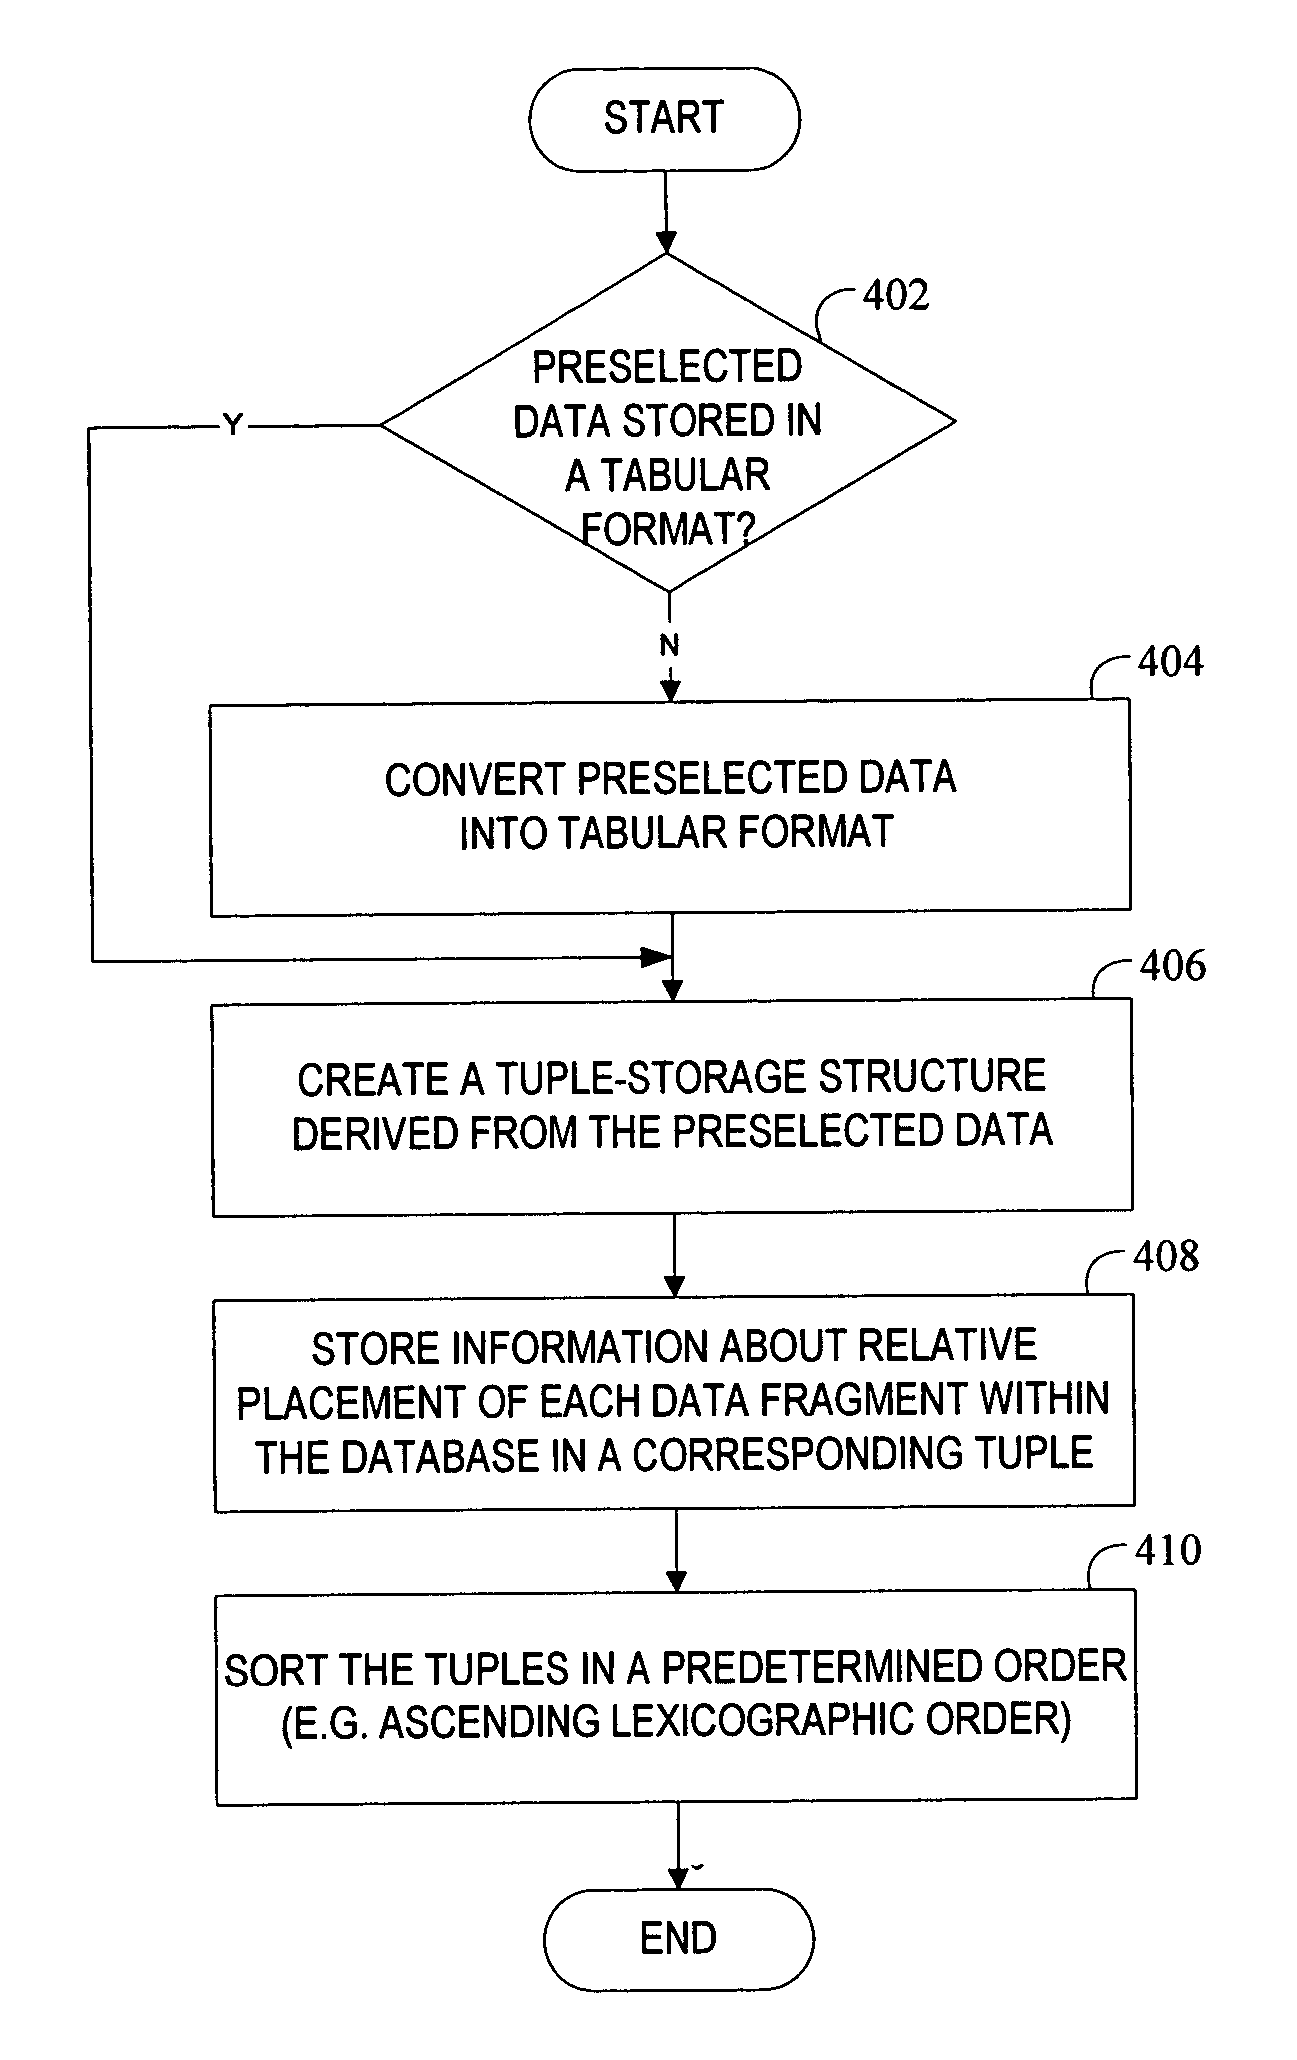 Personal computing device -based mechanism to detect preselected data